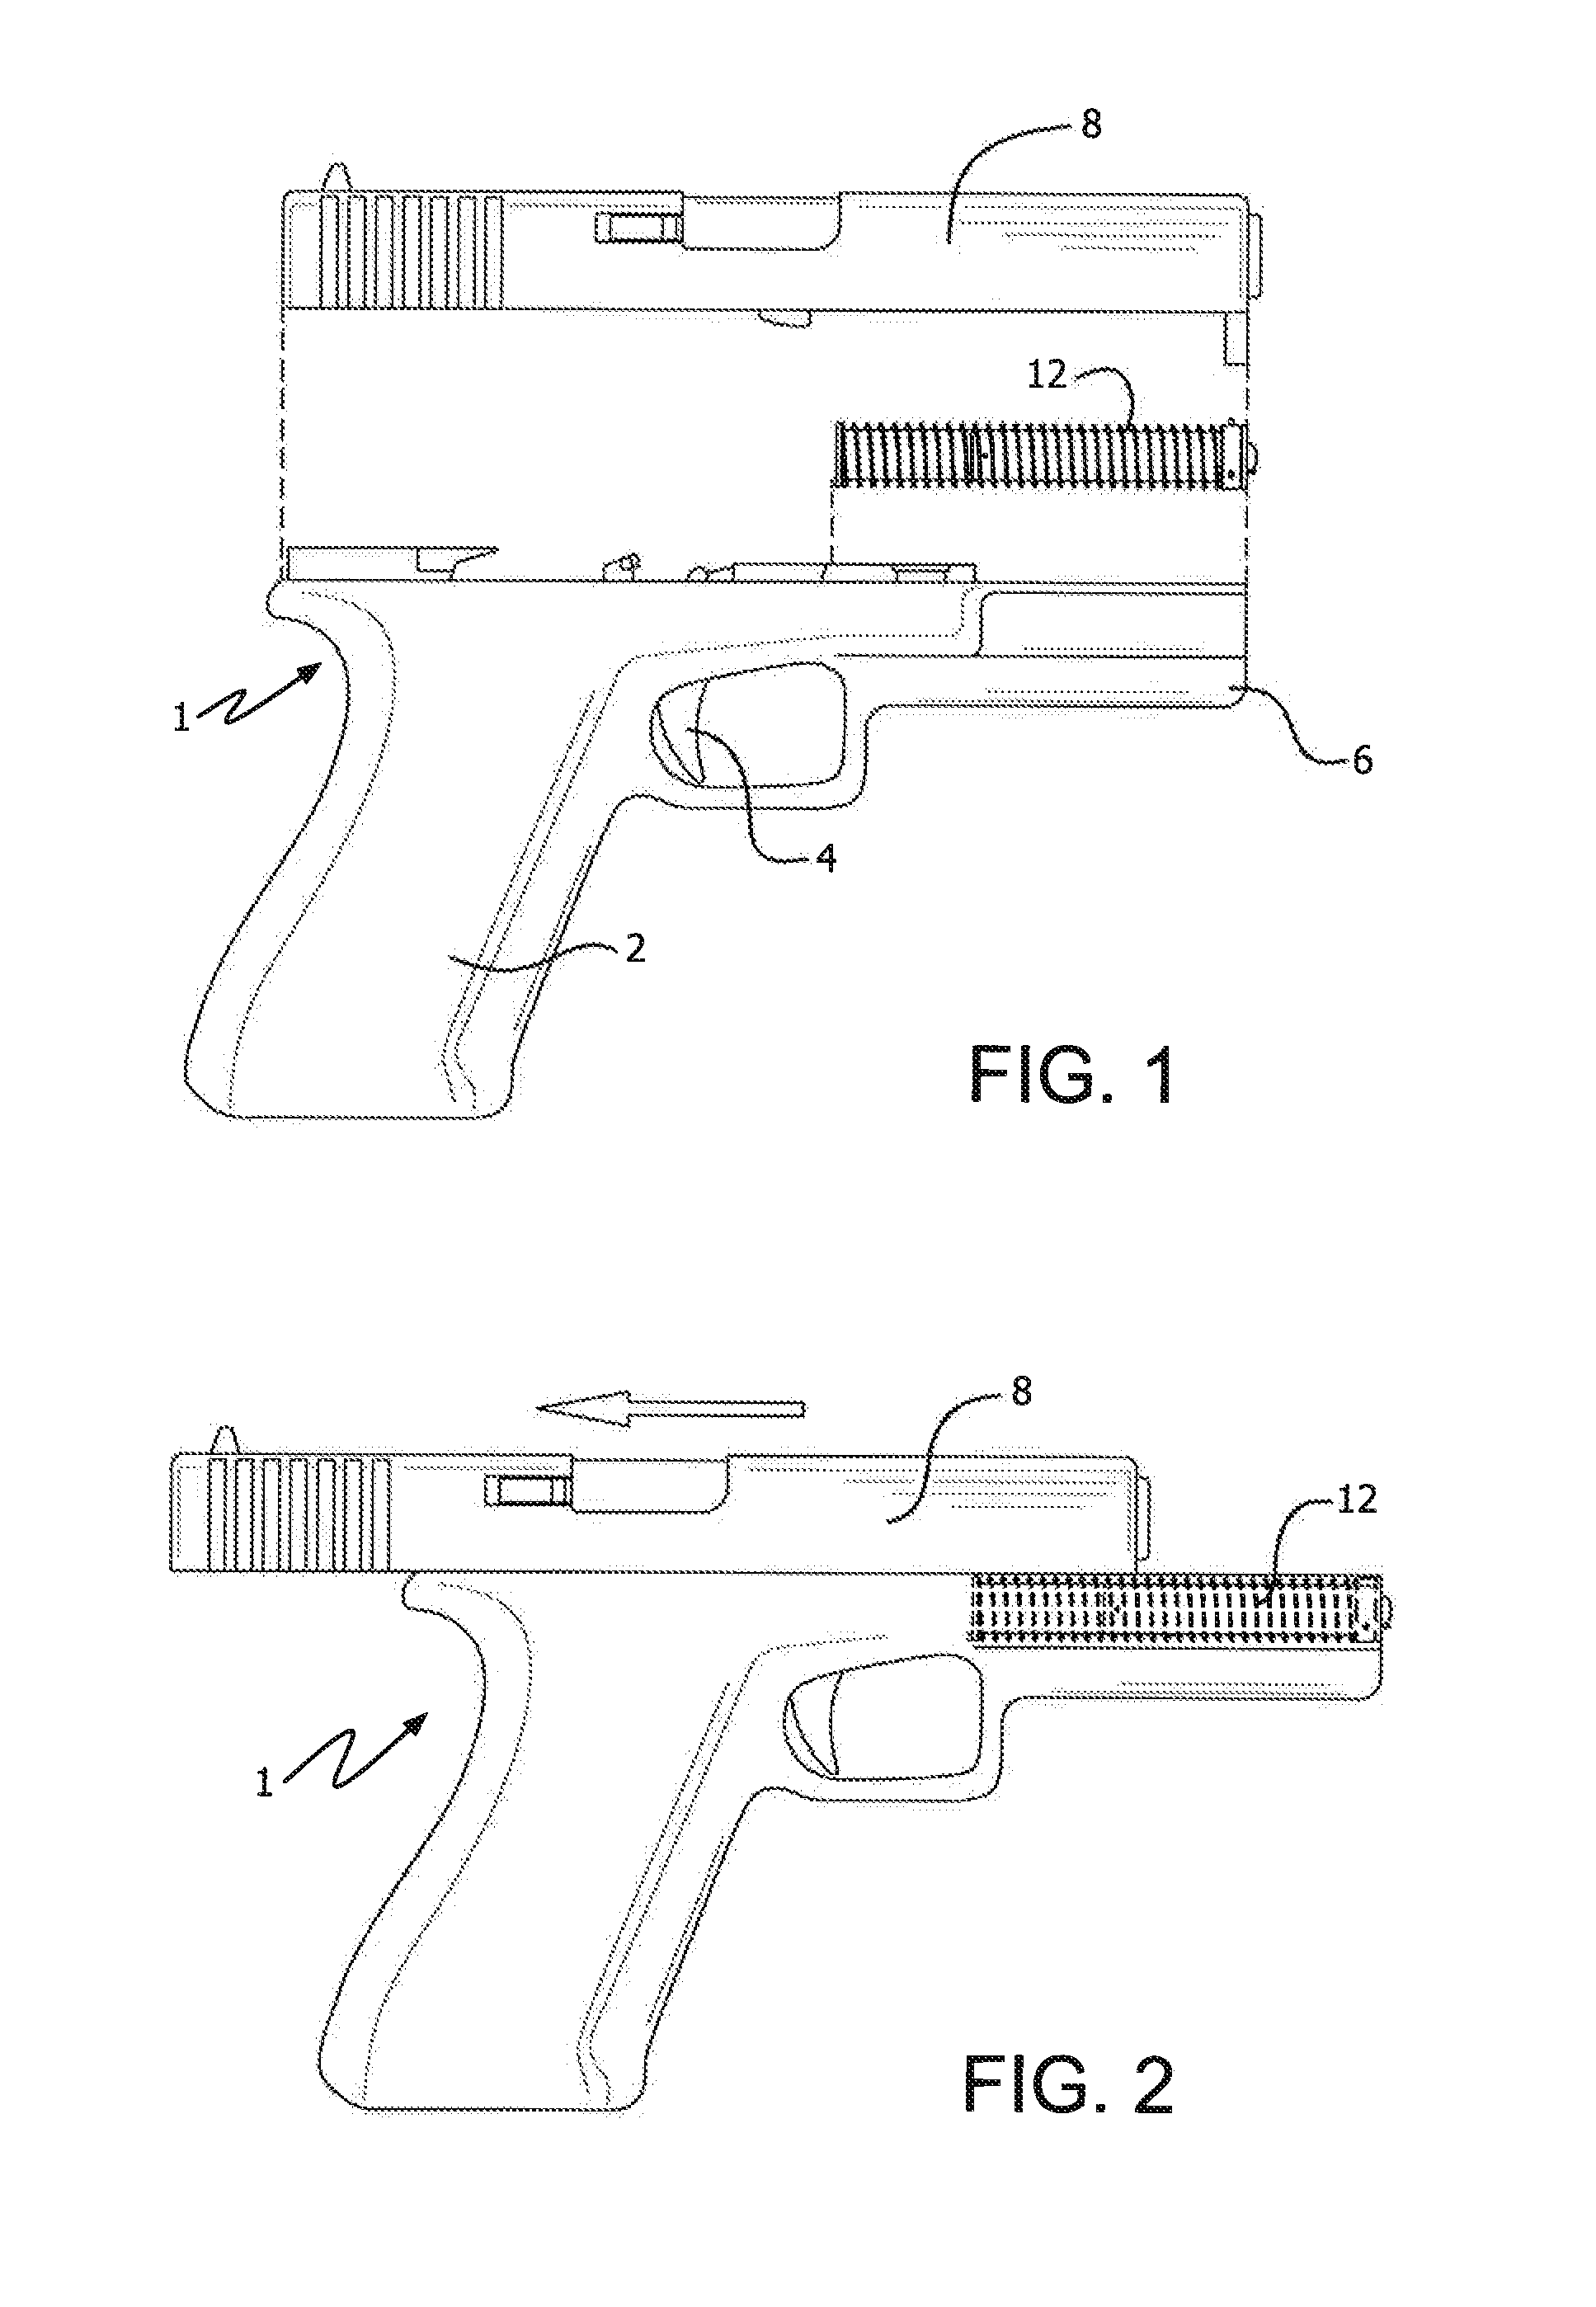 Remote controlled firearm safety locking system